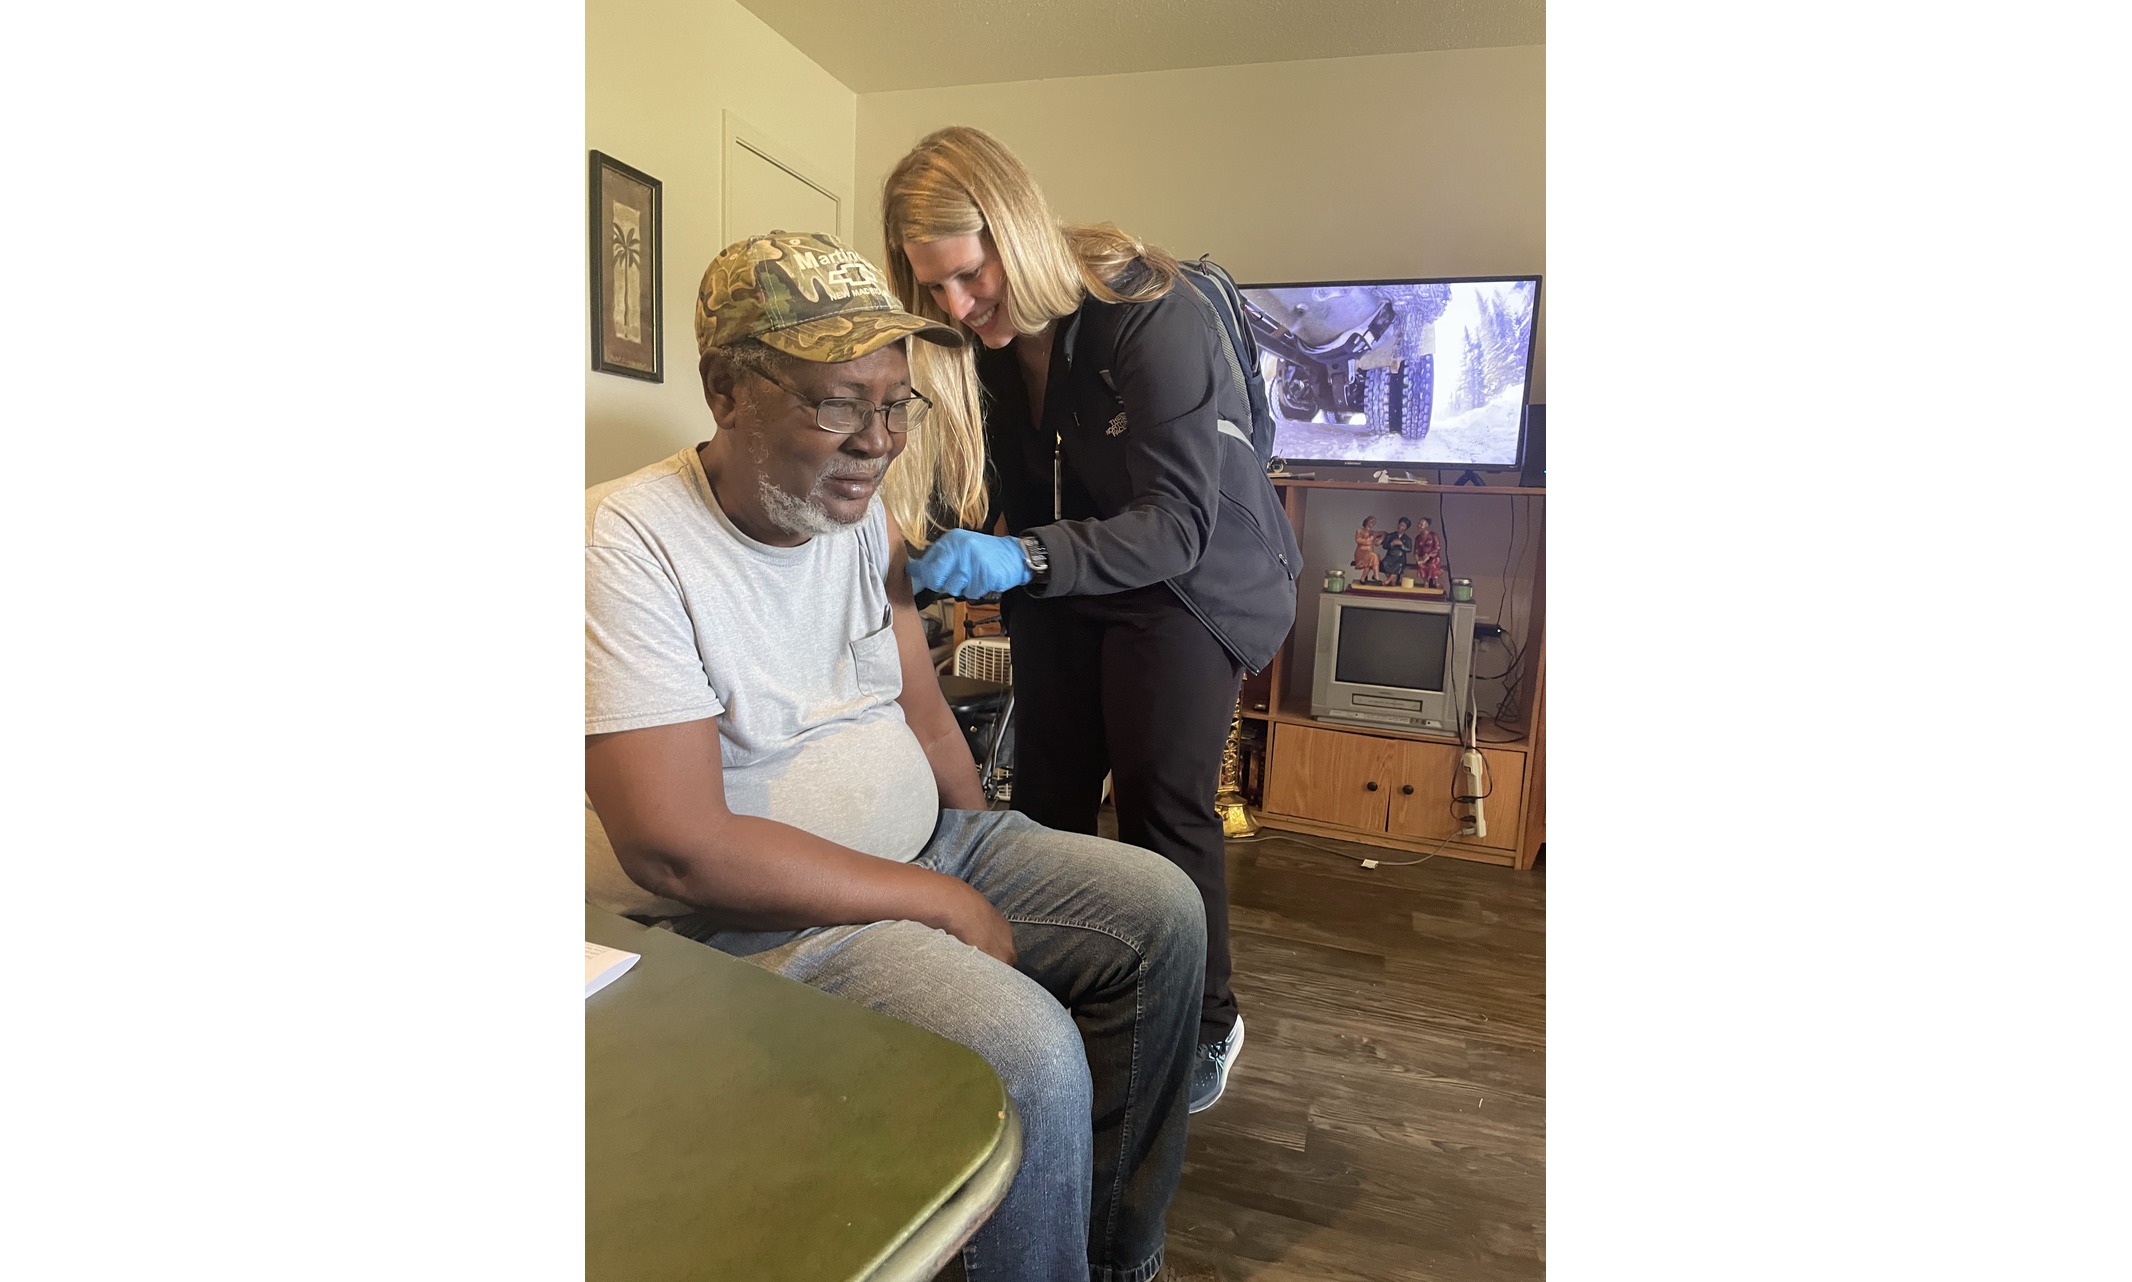 Blonde woman smiling while administering vaccination to middle-aged man in his home